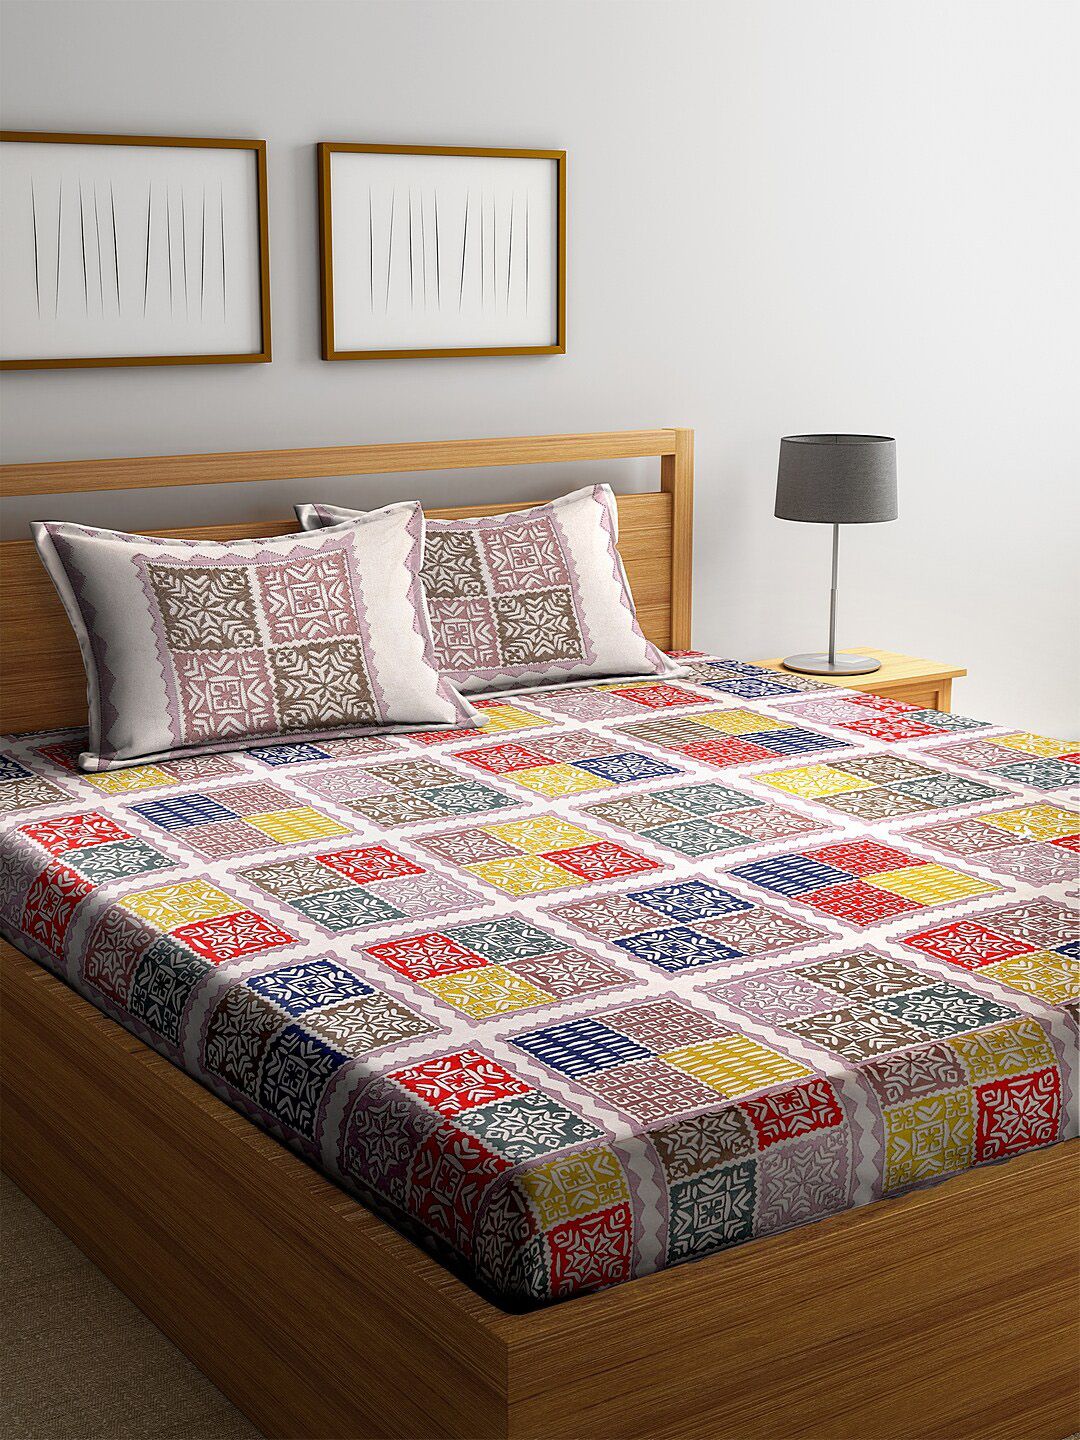 Rajasthan Decor Multicoloured Geometric 144 TC Cotton 1 King Bedsheet with 2 Pillow Covers Price in India